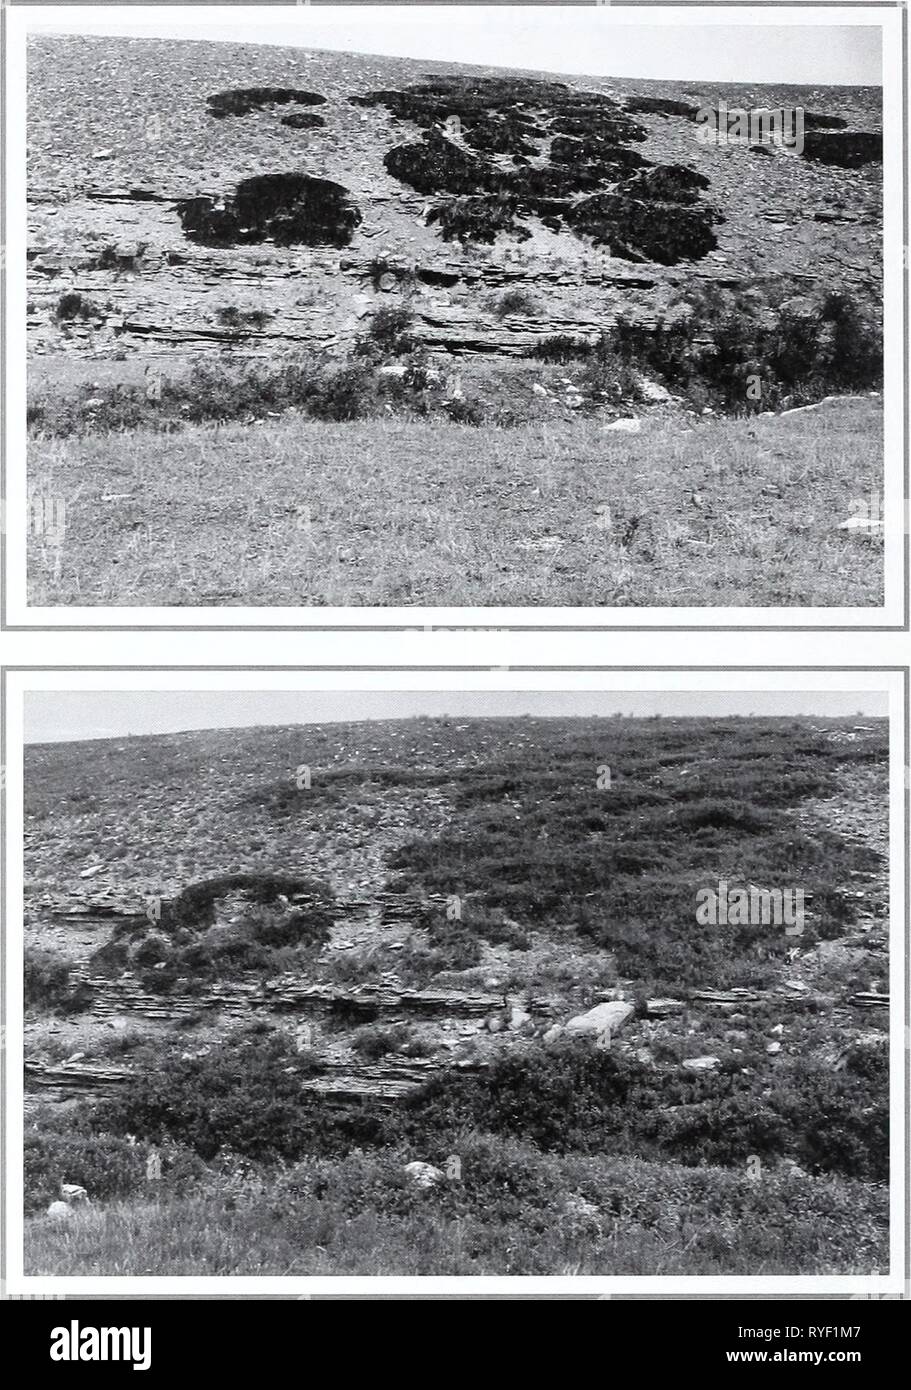 Eighty years of vegetation and landscape changes in the Northern Great Plains : a photographic record  eightyyearsofveg45klem Year: 2001  Original Photograph September 23, 1917. ShantzR-9-1917. Facing north. First Retake and Description June 29, 1959. W.S.P., G-6-1959. Clumps of Juniperus growing on the side of a wash cut in the original picture. Dr. Shantz mentions both Juniperus horizontalis and Juniperus commu- nis. In the retake there was only one plant of Juniperus communis left. The shrub in the foreground is mainly Shepherdia canadensis (from Phillips 1963, p. 37). Second Retake July 23 Stock Photo